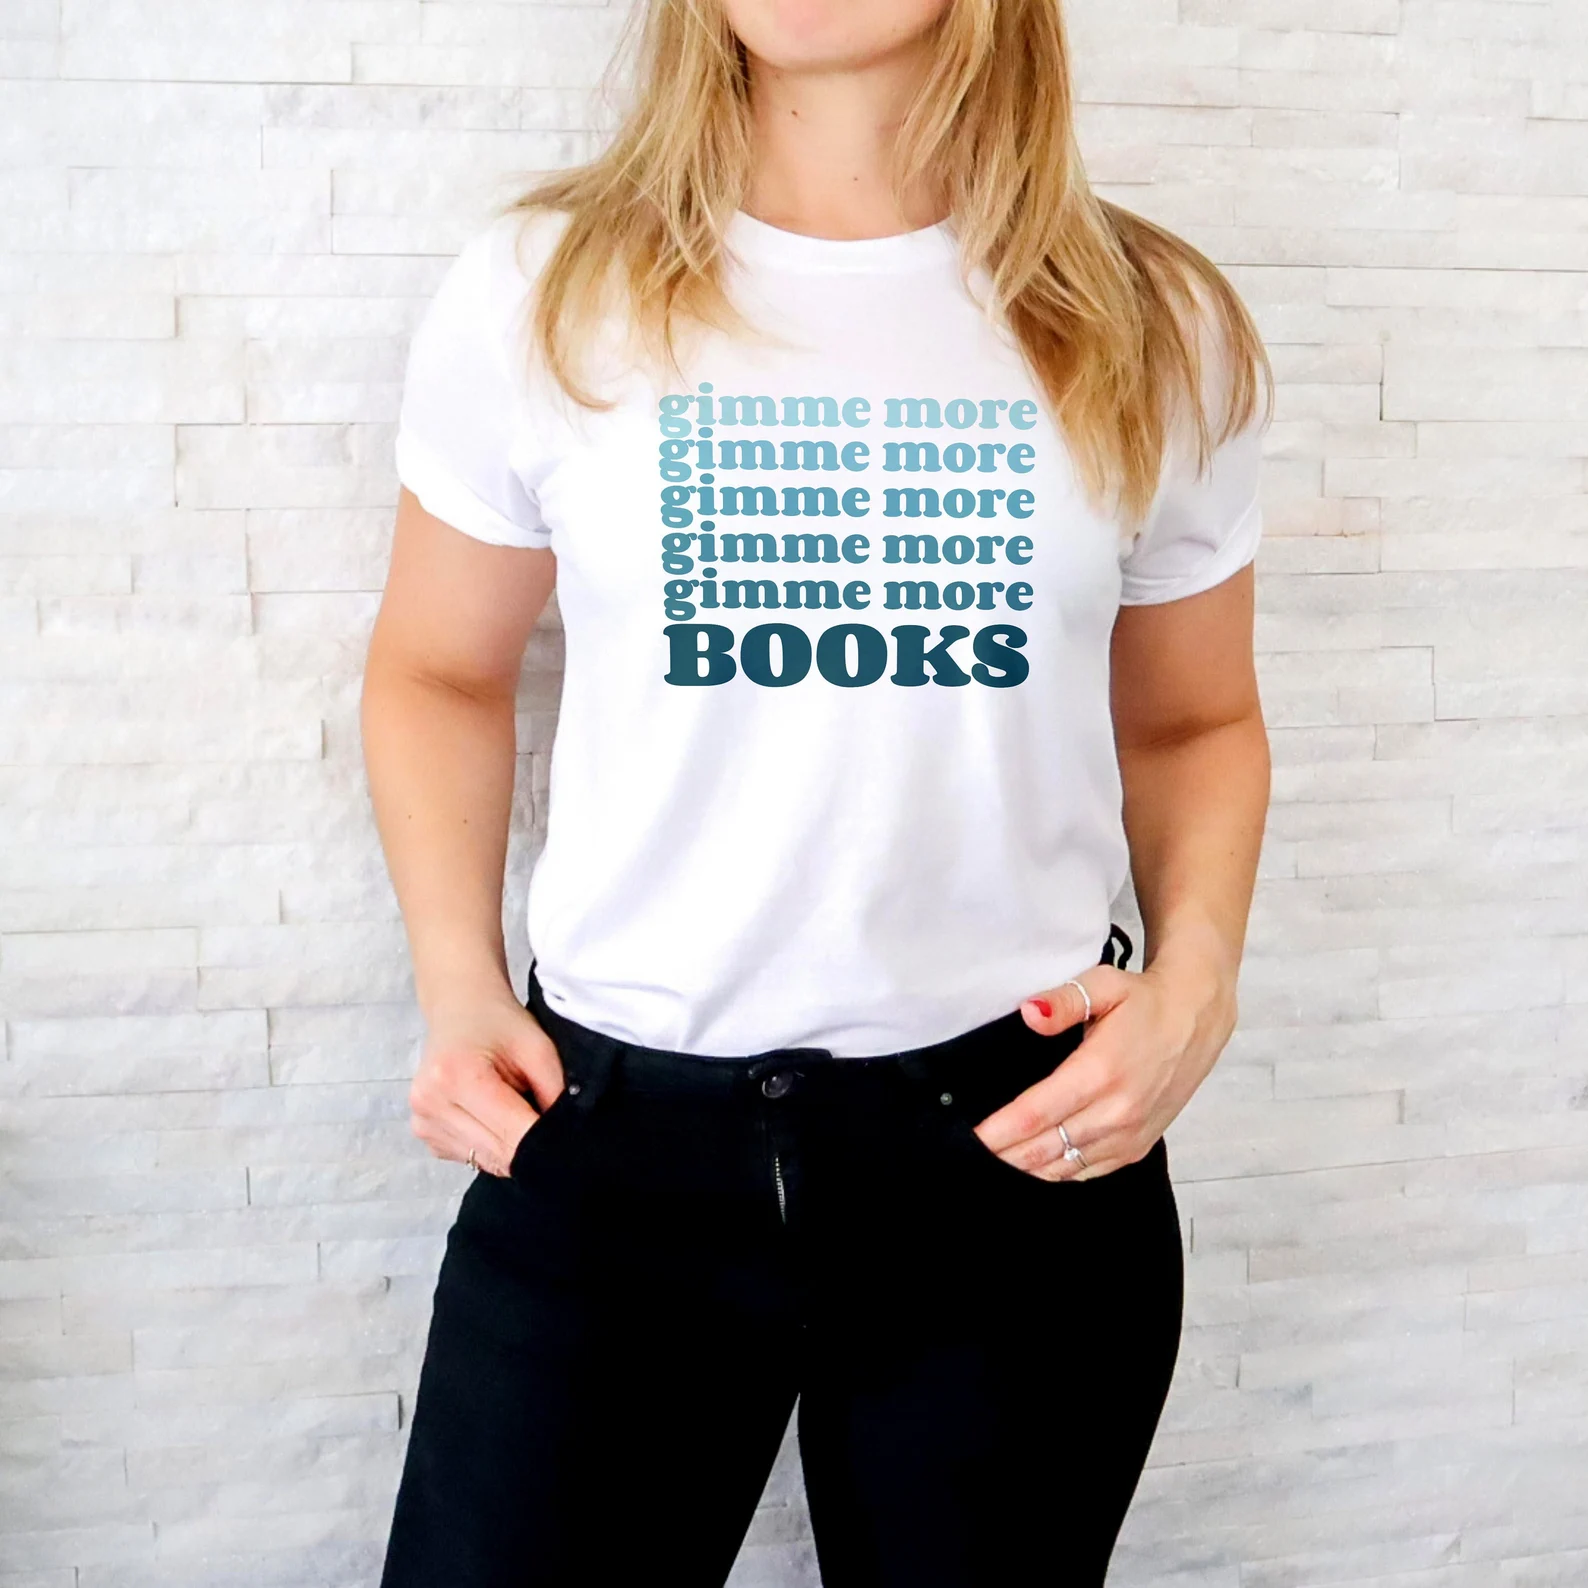 white t-shirt with blue-green lettering that says "gimme more books"